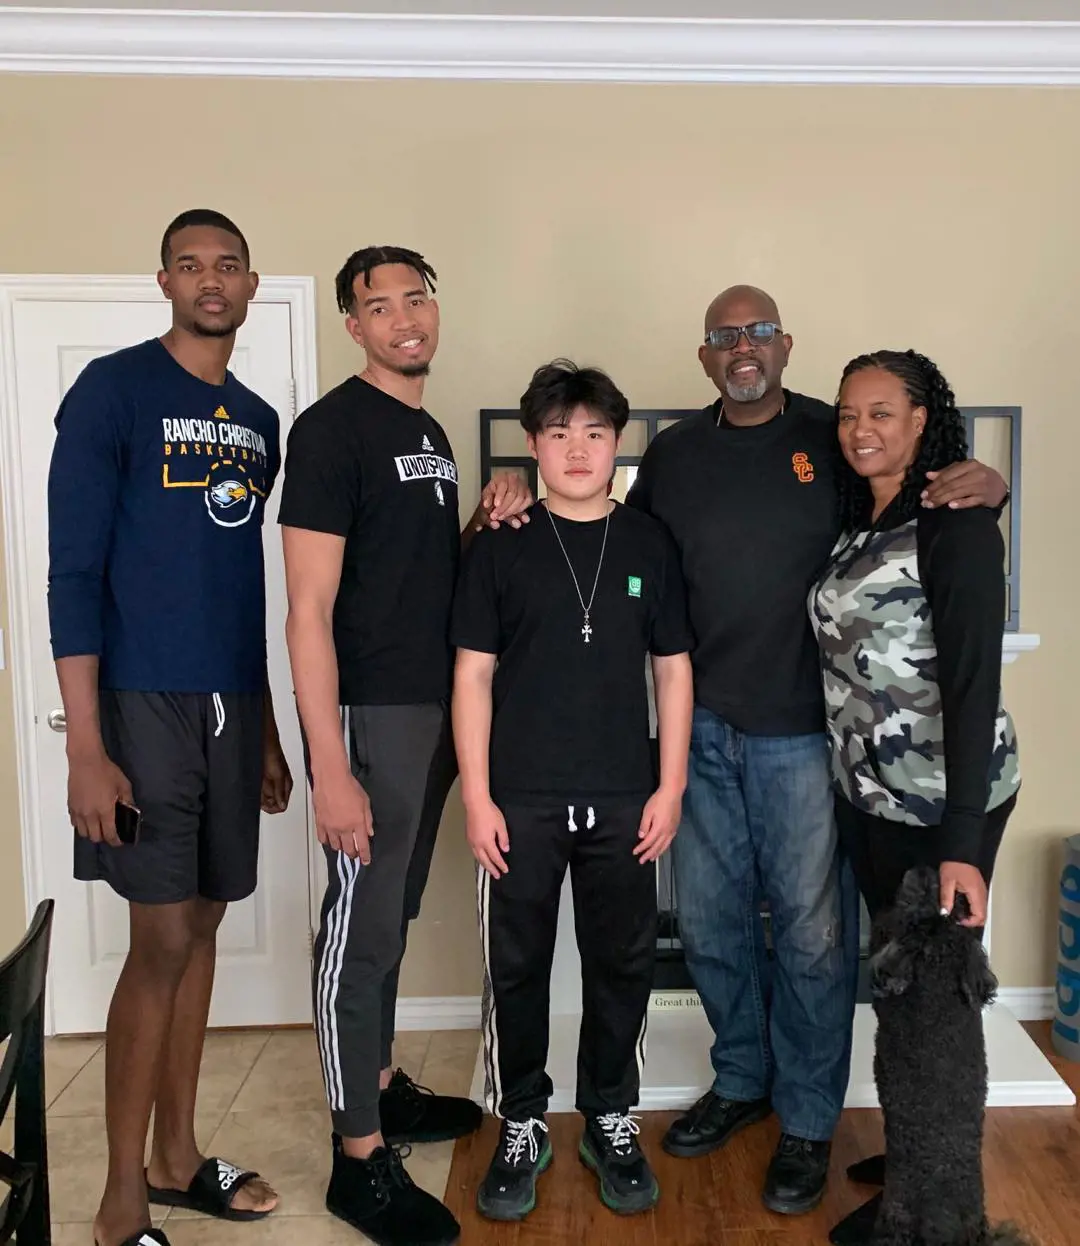 The foreign exchange student Johnny (middle) with Evan Mobley and his family.